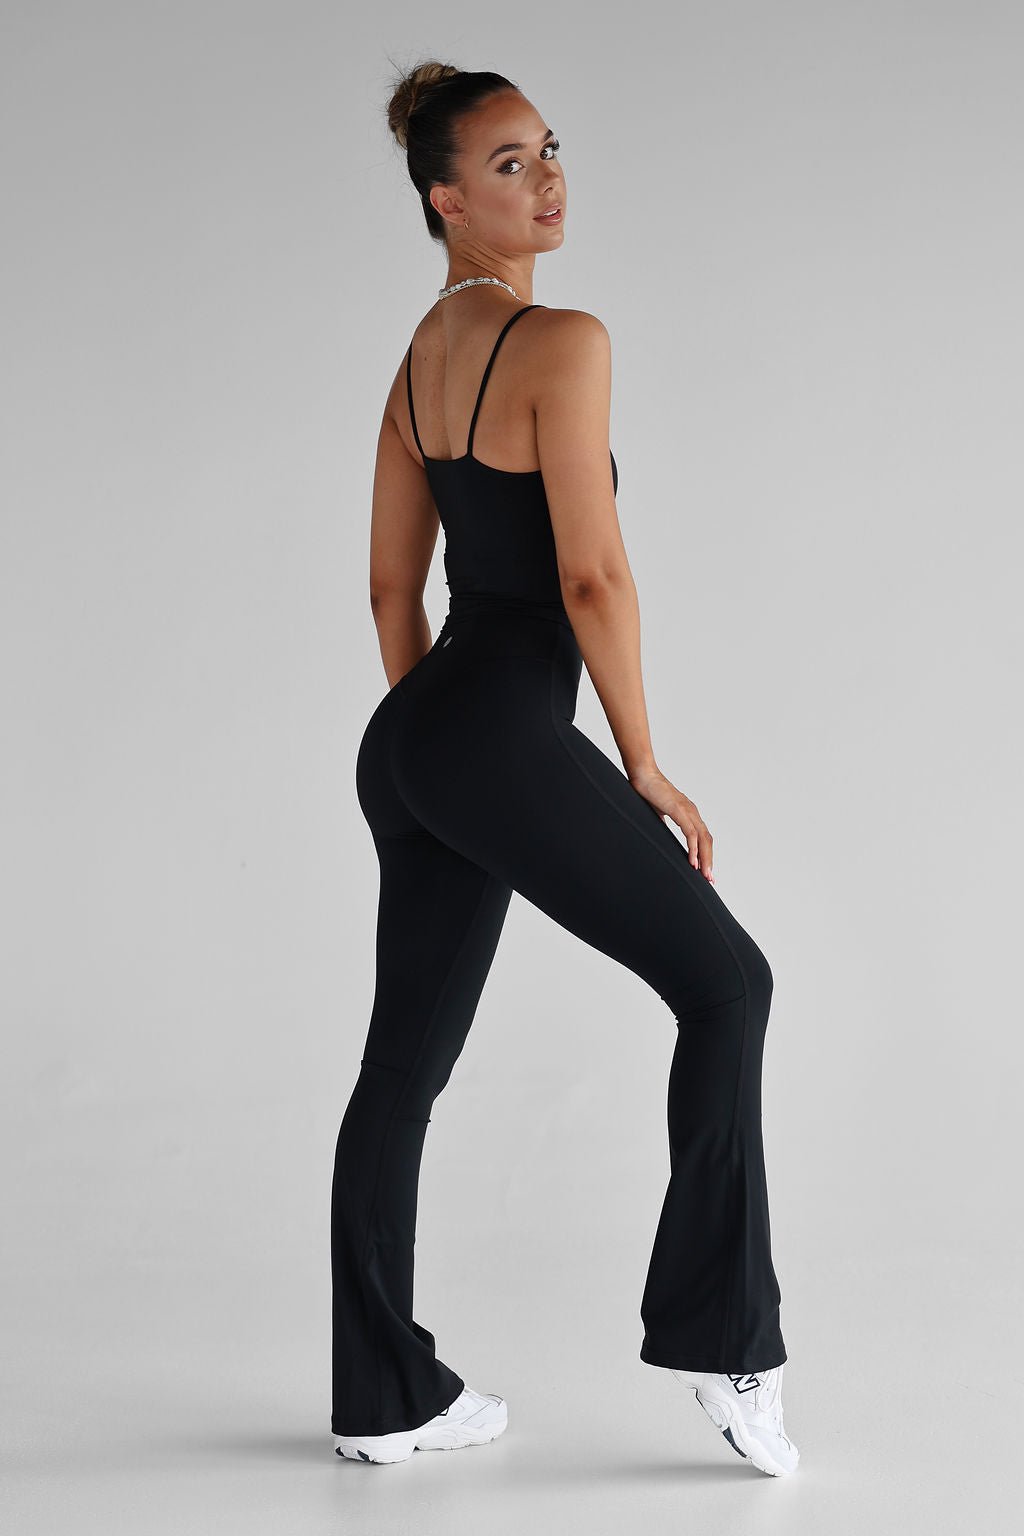 High Waist Wide Leg Flare Aritzia Flare Leggings For Women Lu 089 Groove  Fitness Pants For Gym, Yoga, And Summer From Cw2023, $10.25